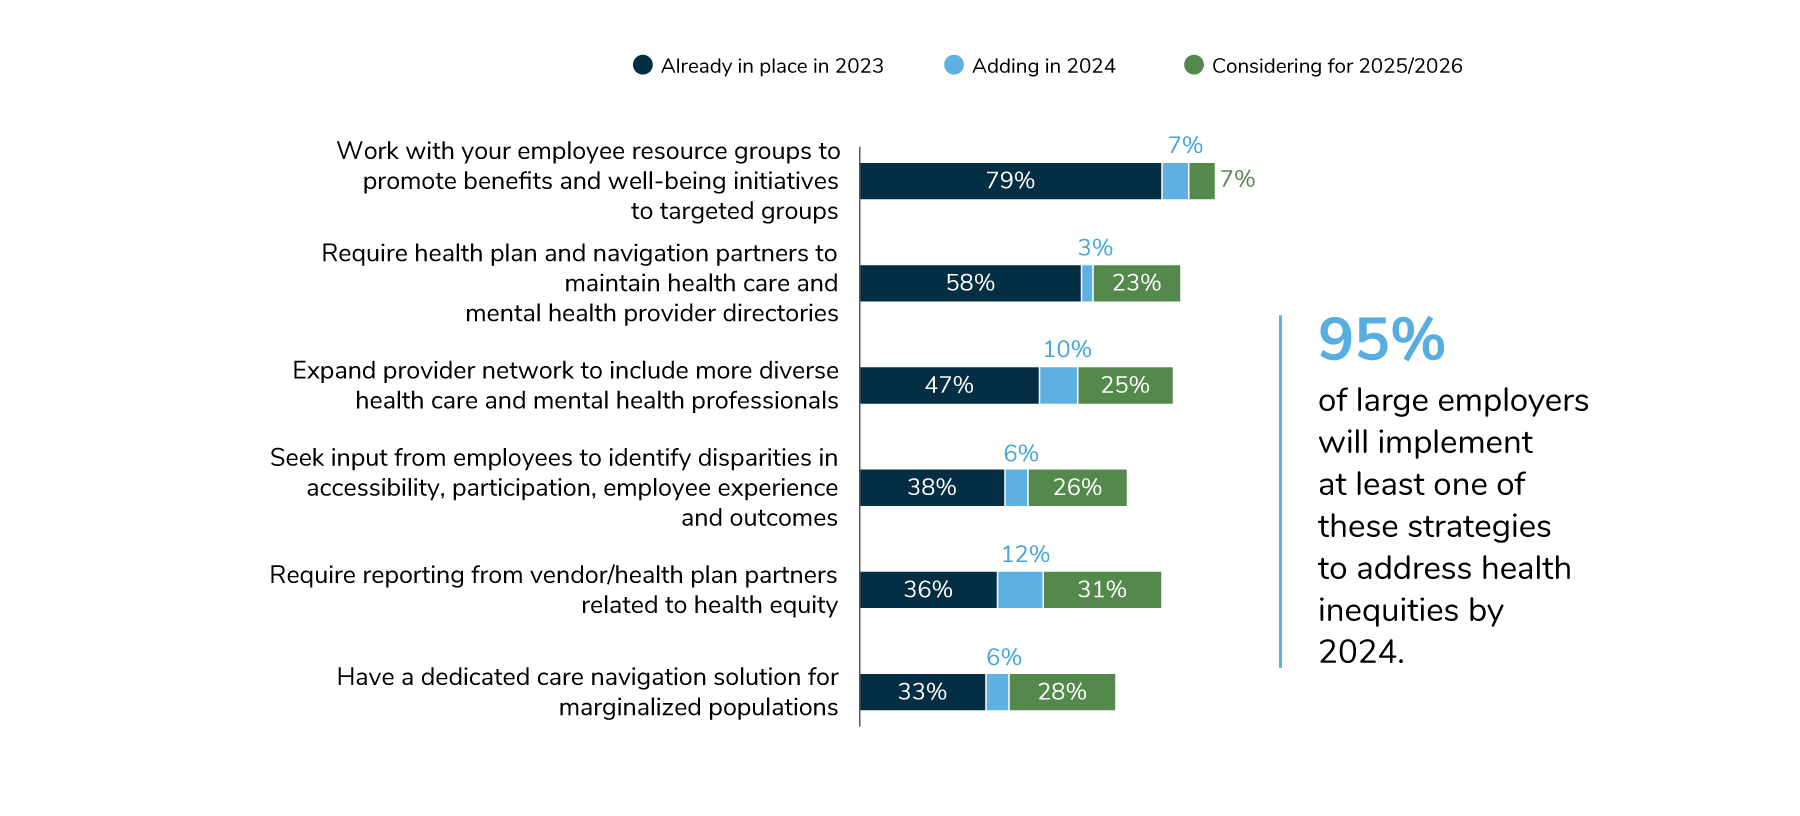 In 2024, 77% of employers will offer gender-affirming care and treatment. 75% will offer fertility benefit for all types of families. 42% will require health plans to have easily identifiable providers in their networks that have experience and/or specialize in transgender health care.